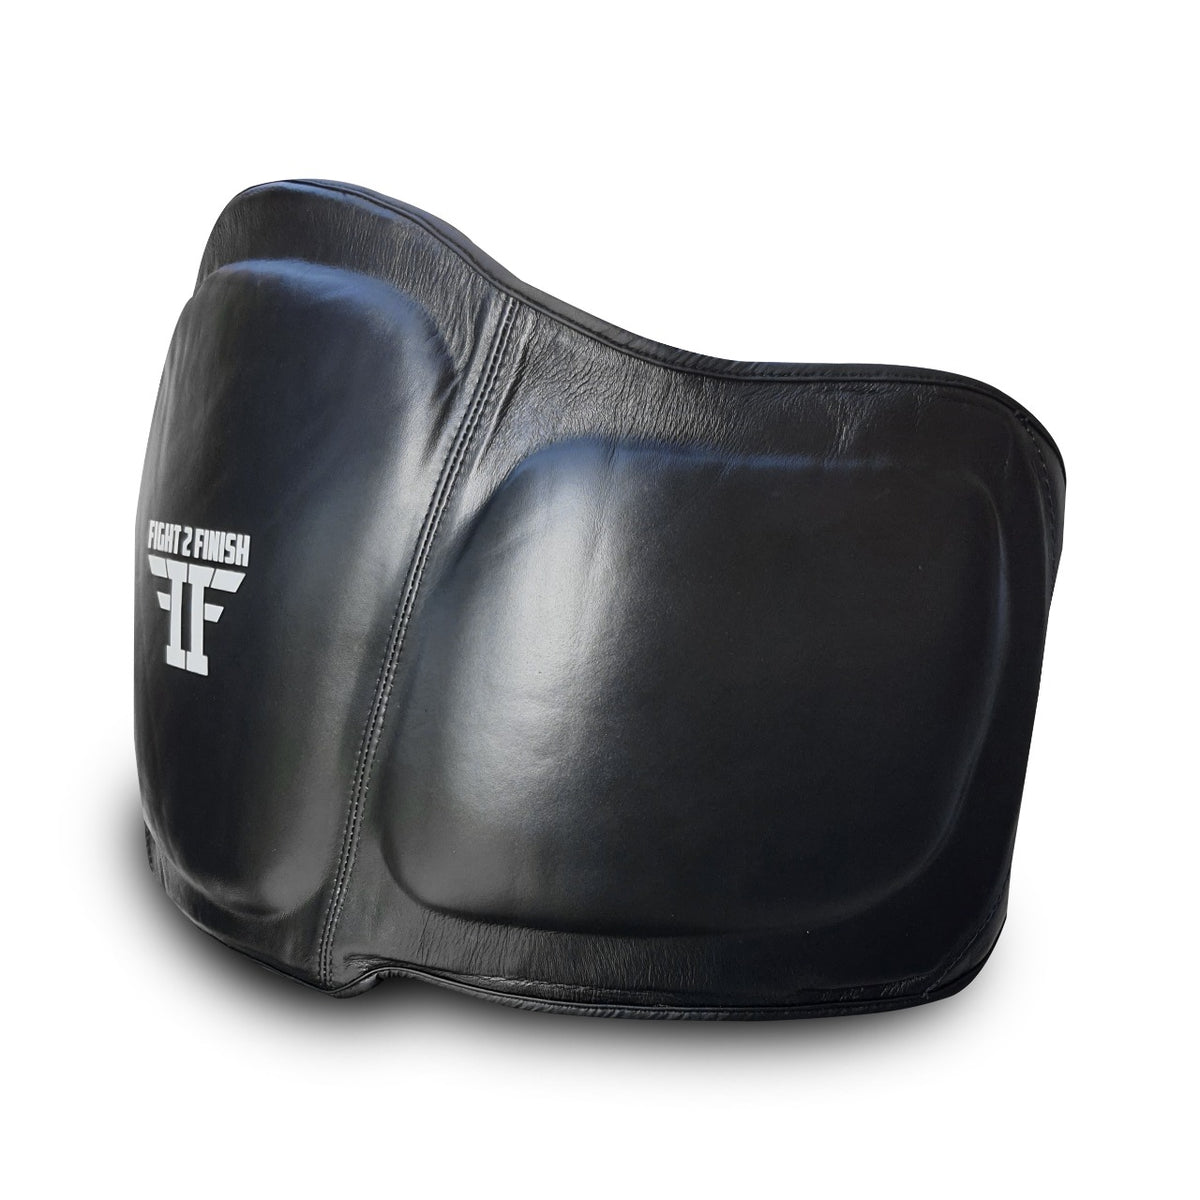 Muay Thai Leather Belly Guard – FIGHT 2 FINISH